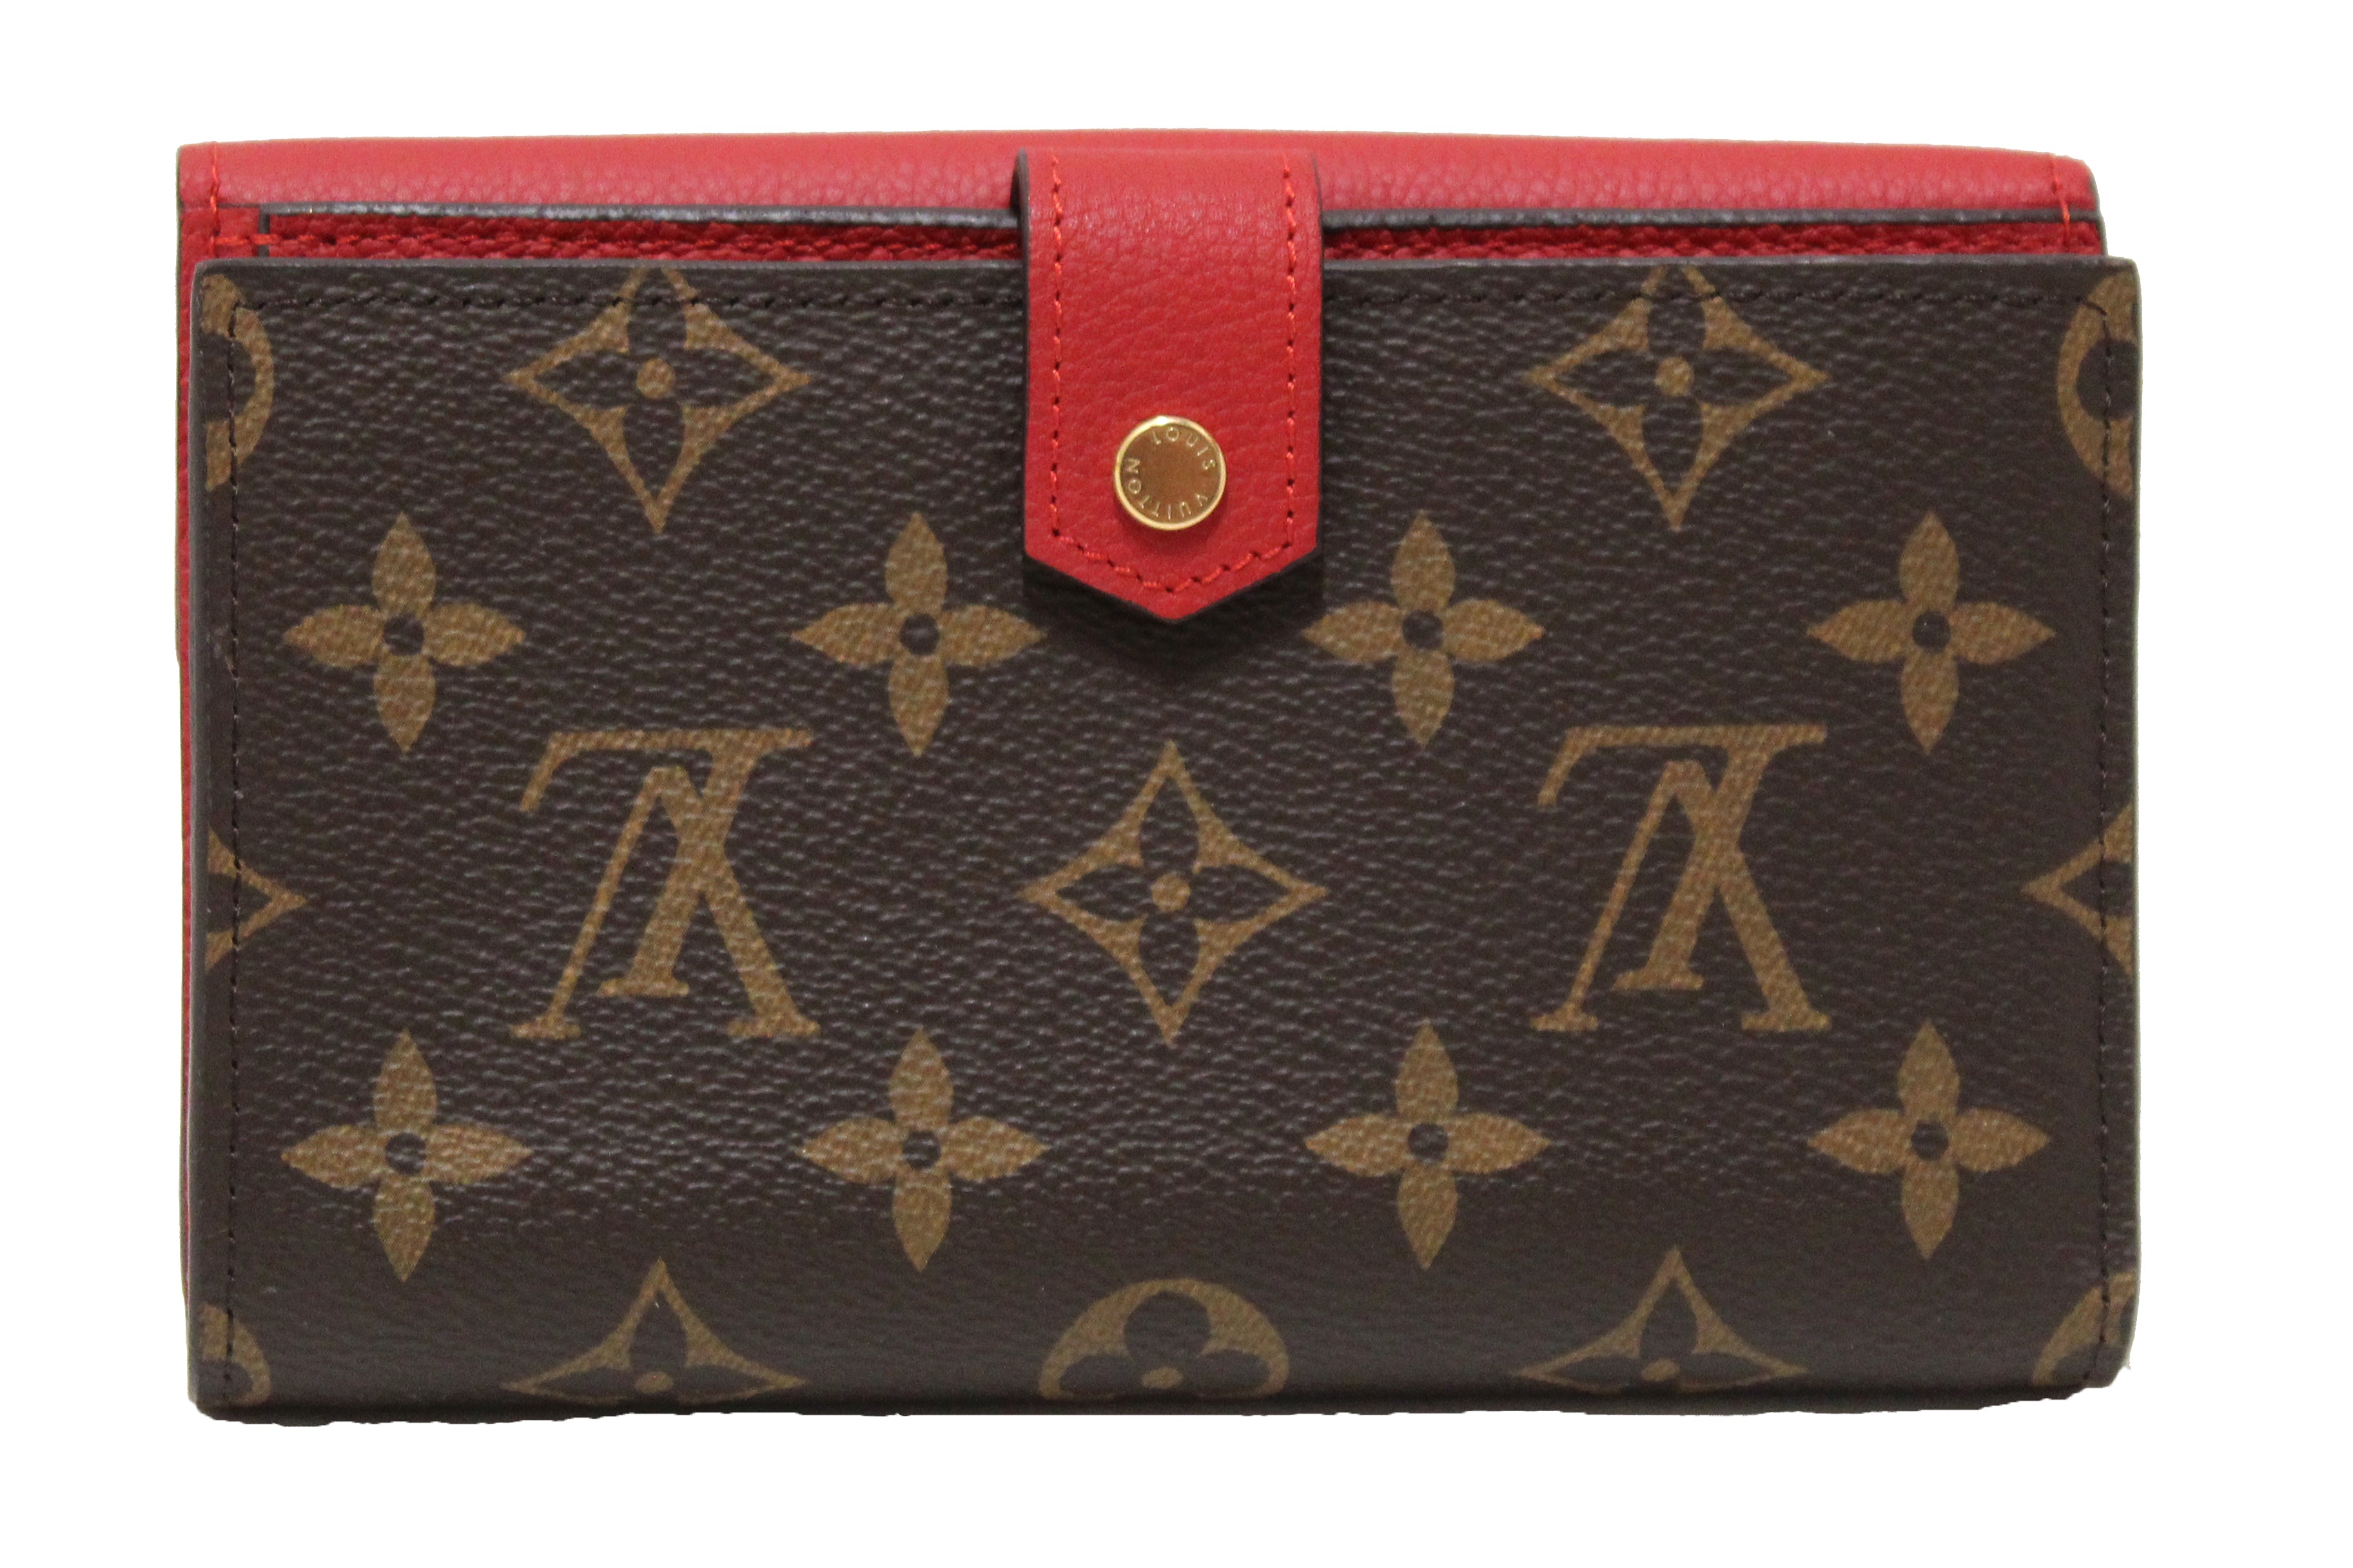 Authentic Louis Vuitton Classic Monogram and Red Calfskin Leather Pallas Compact Wallet